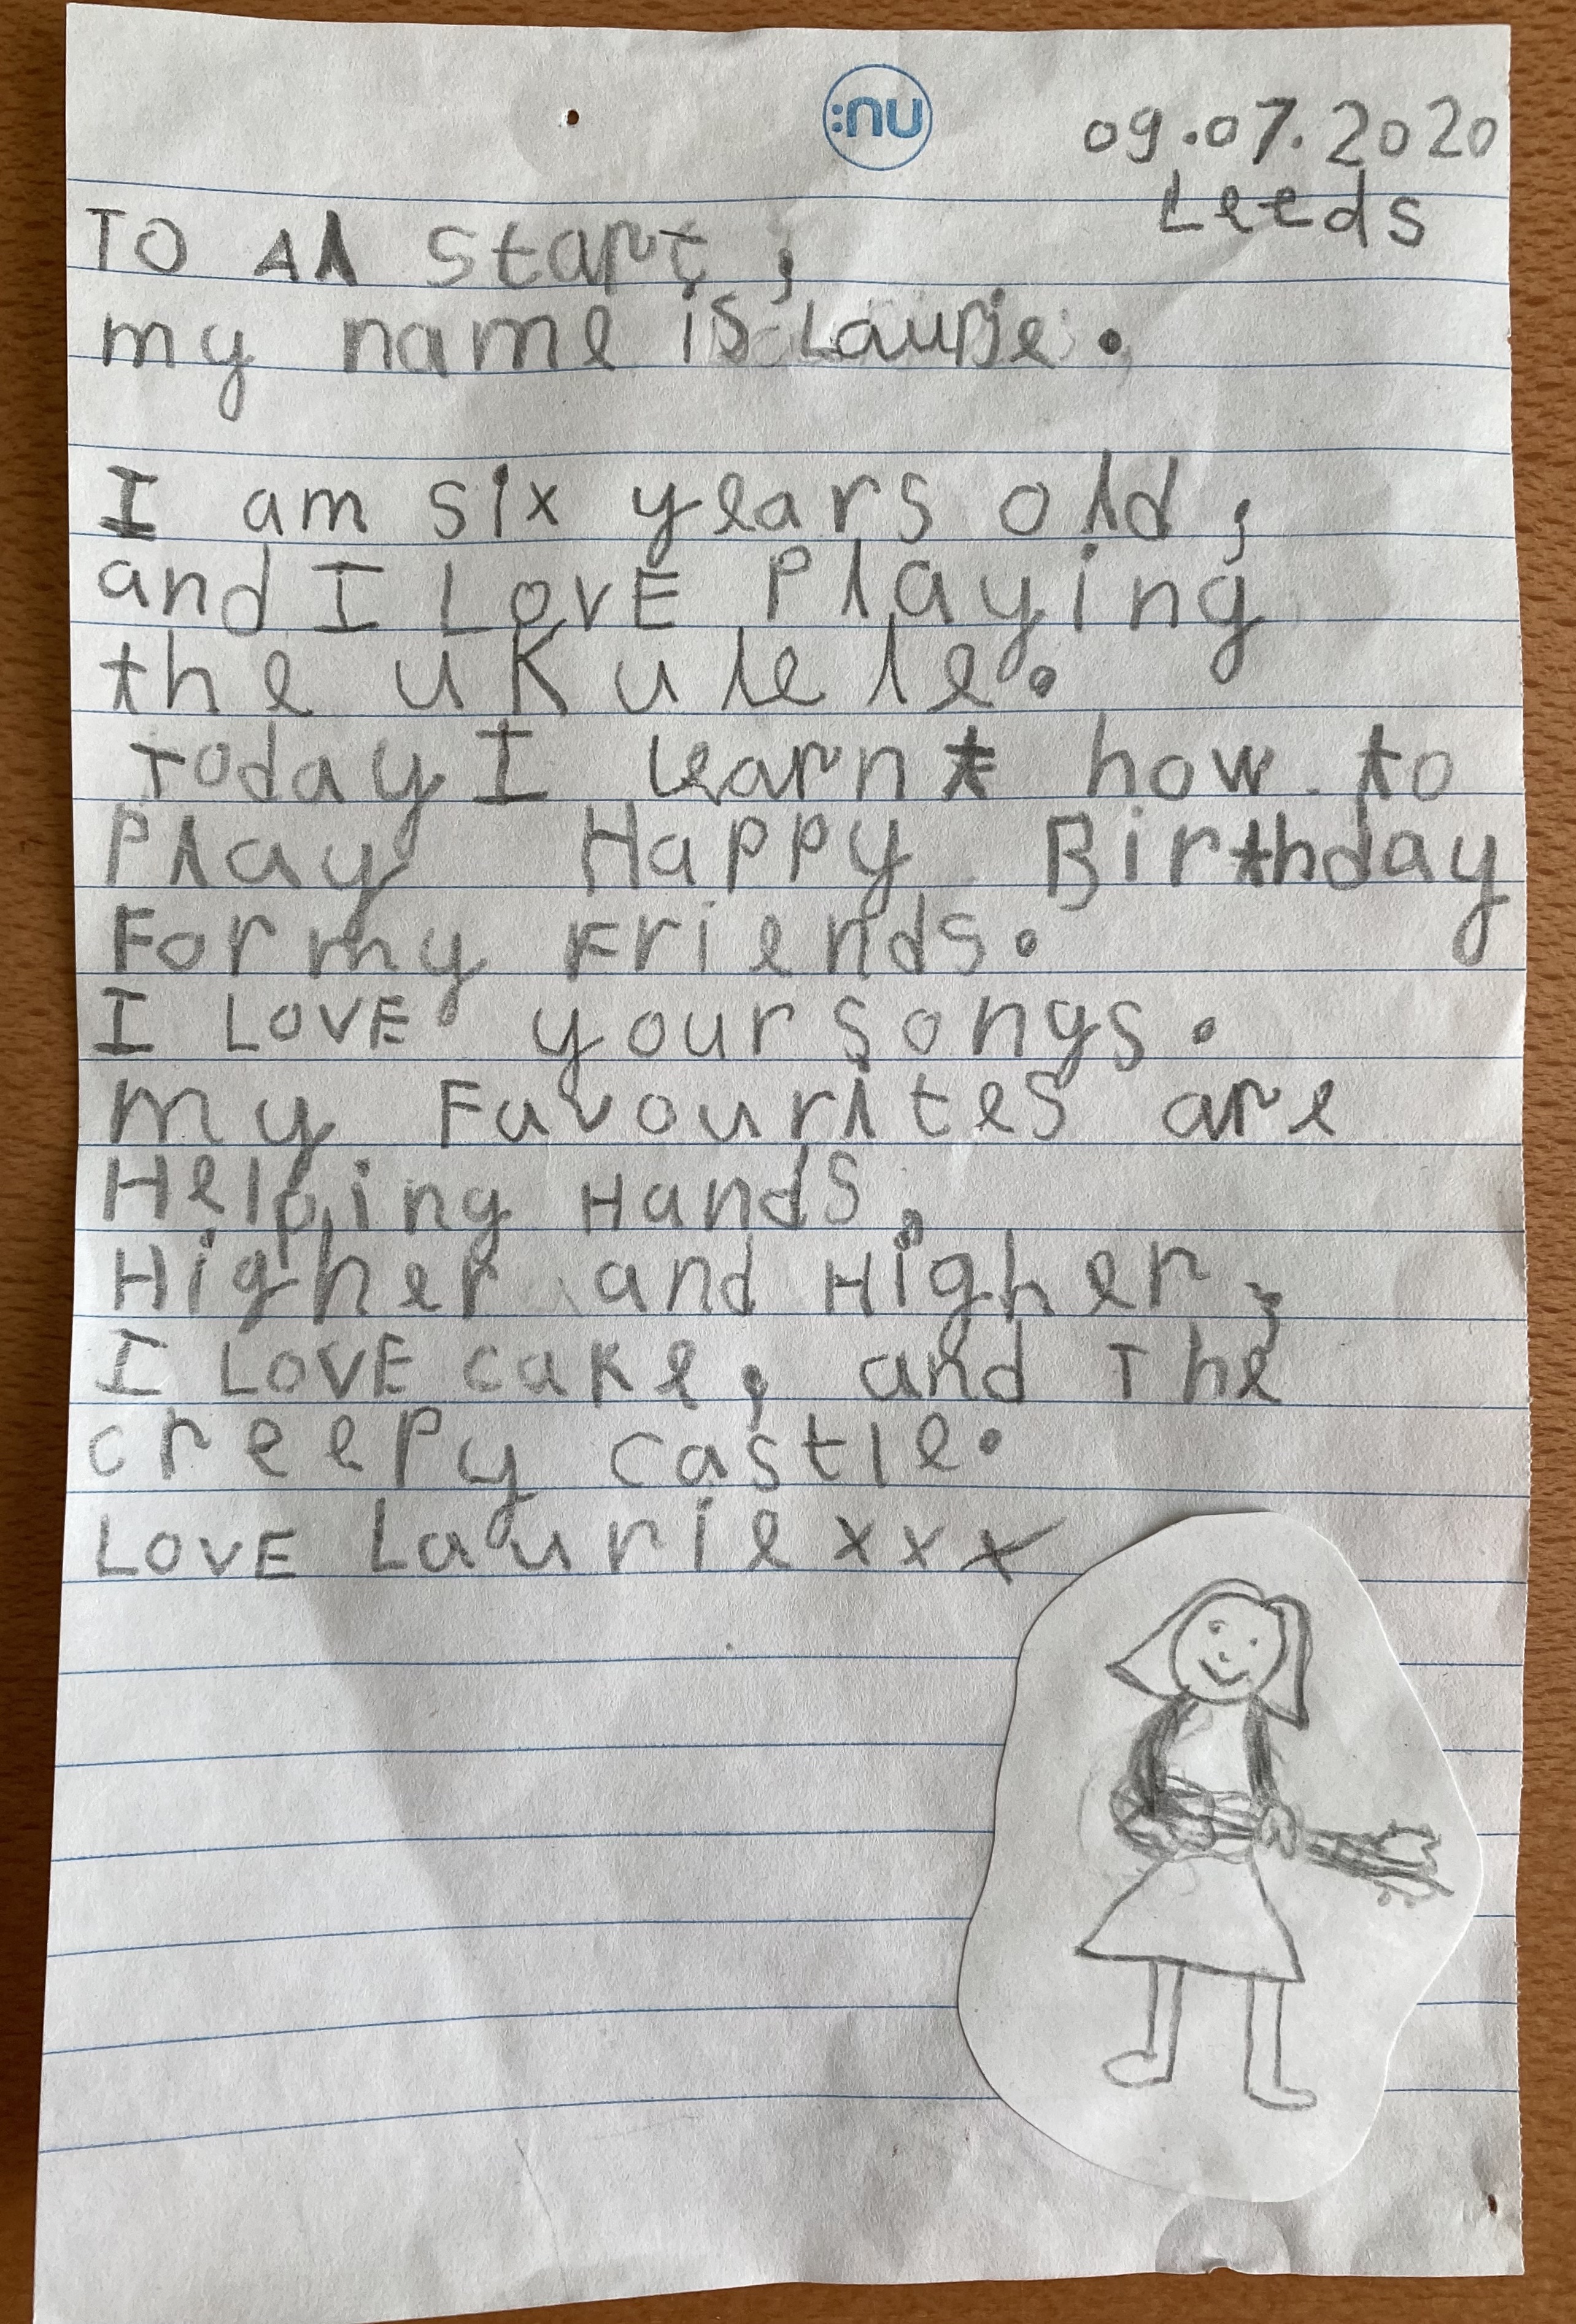 thankyou letter from child who loves Go Kid Music